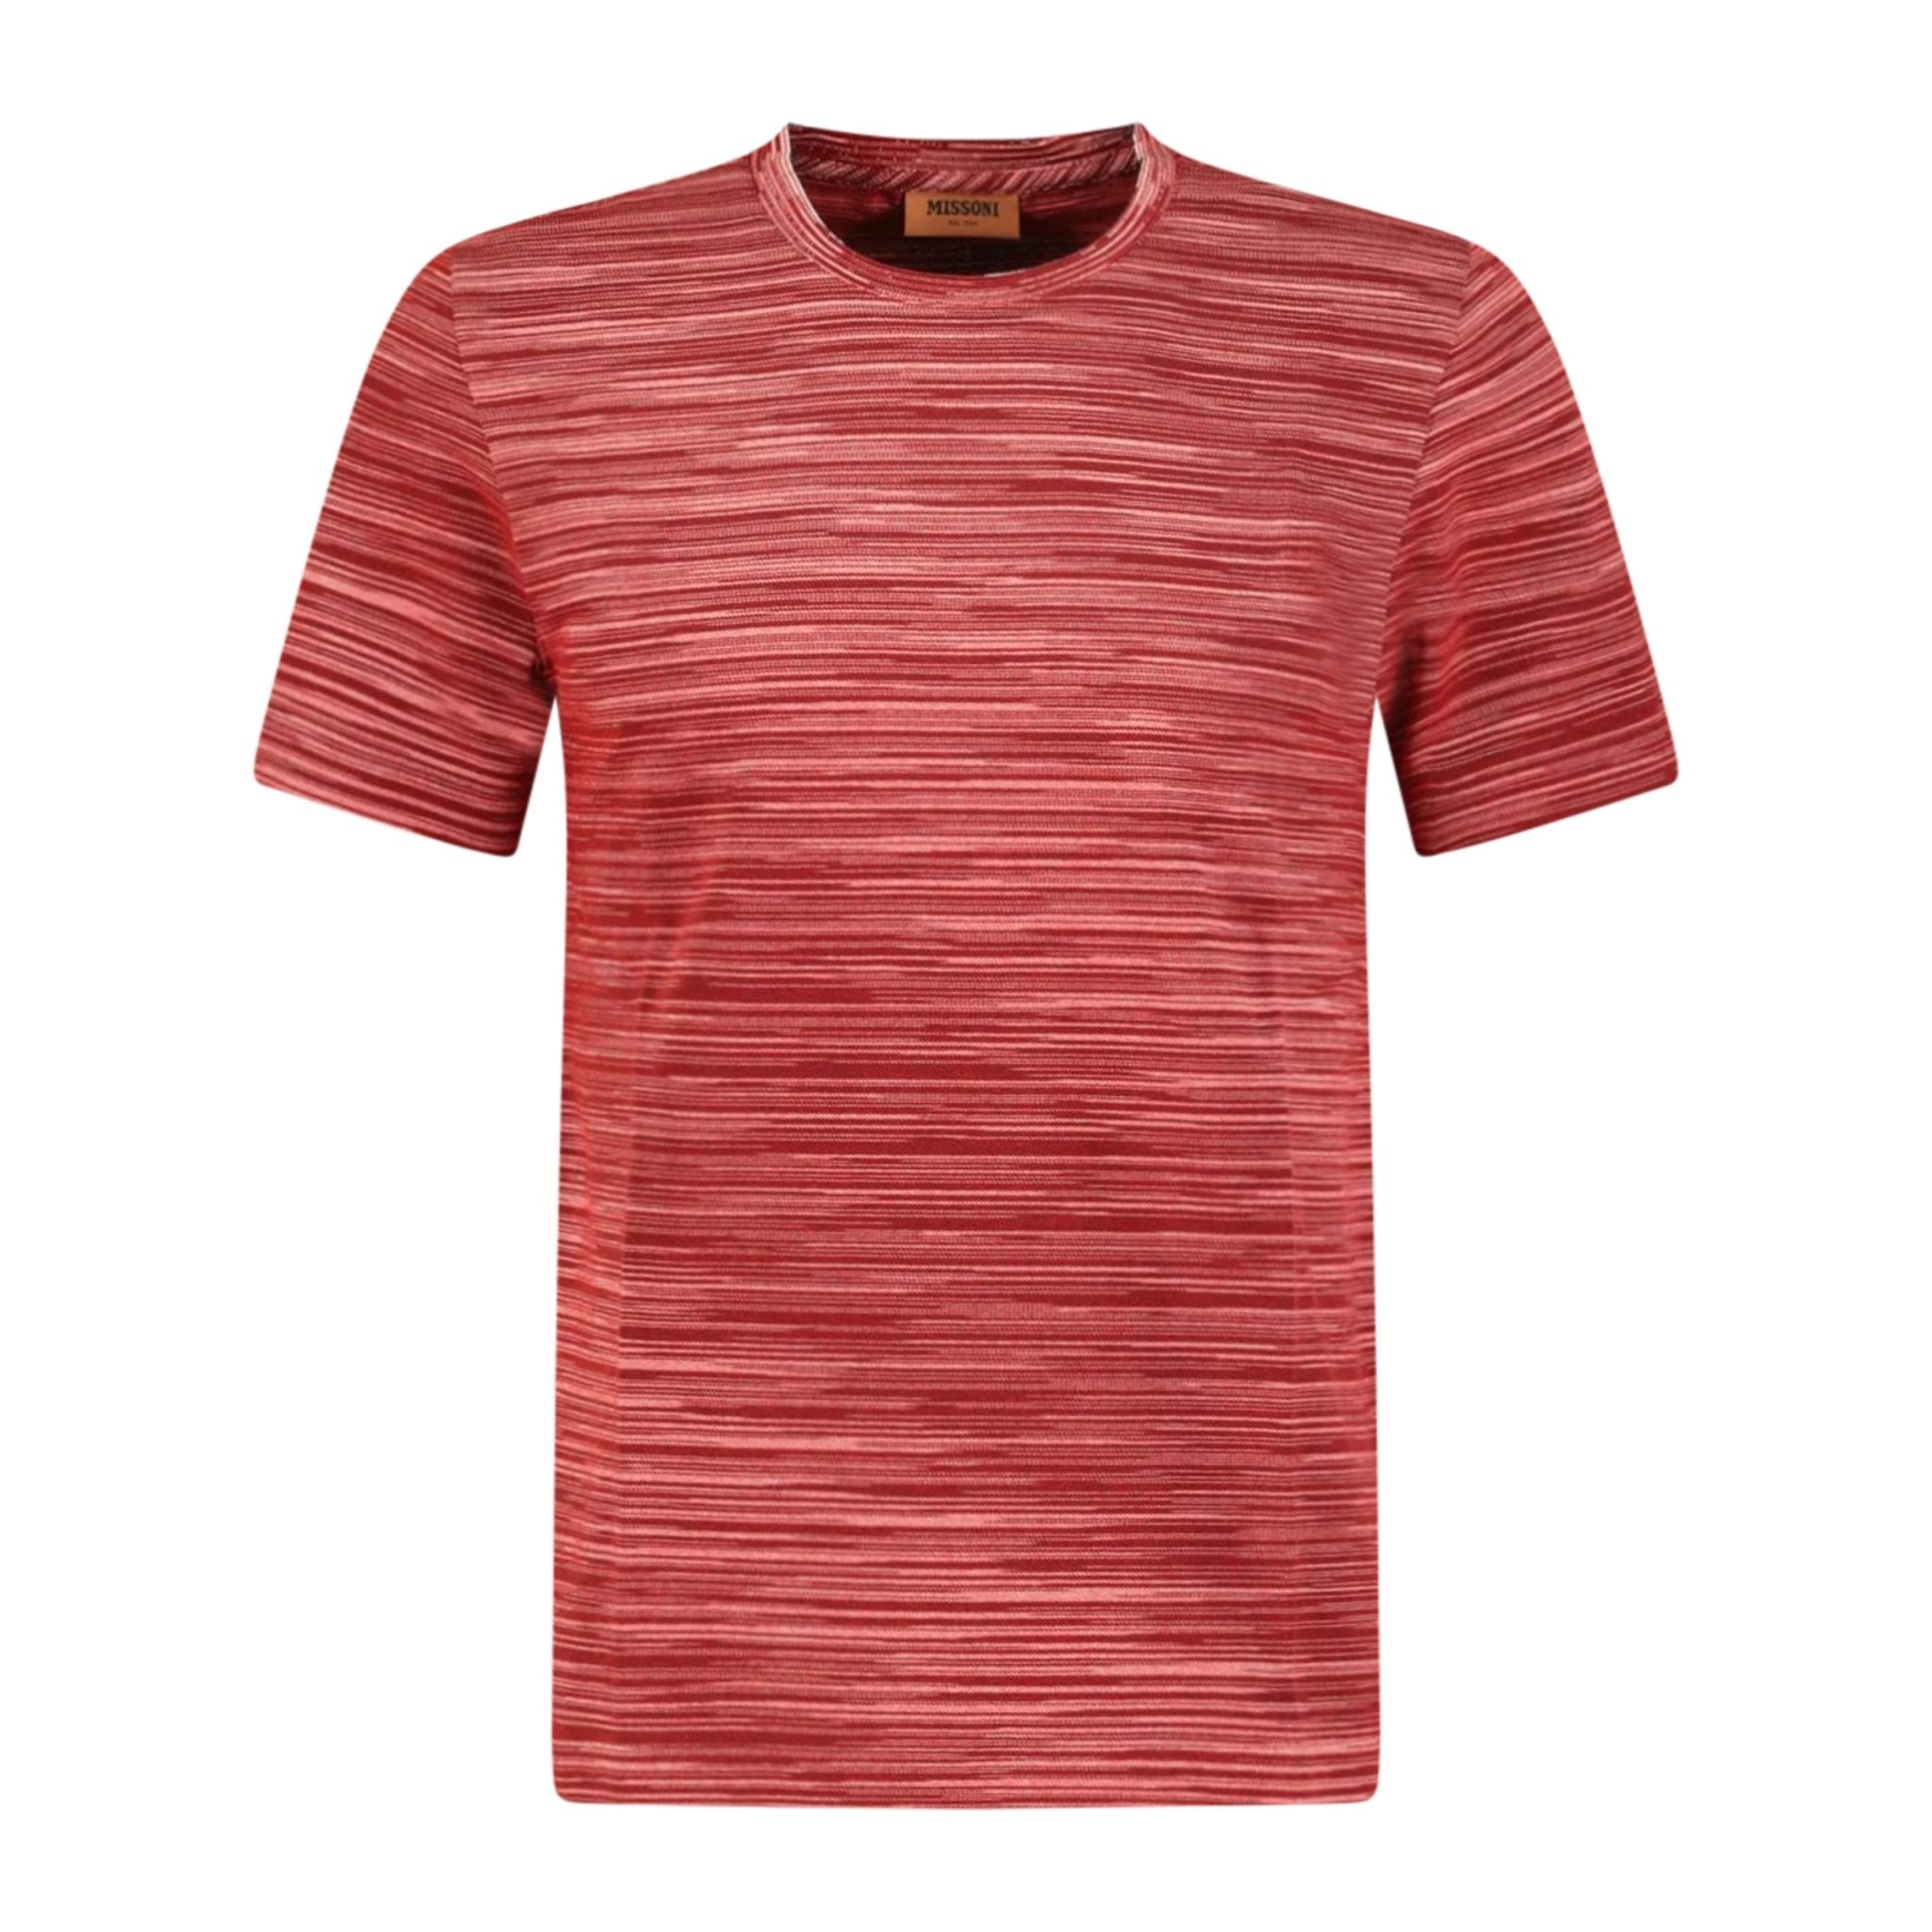 Missoni Knitted Red Stripe T-Shirt